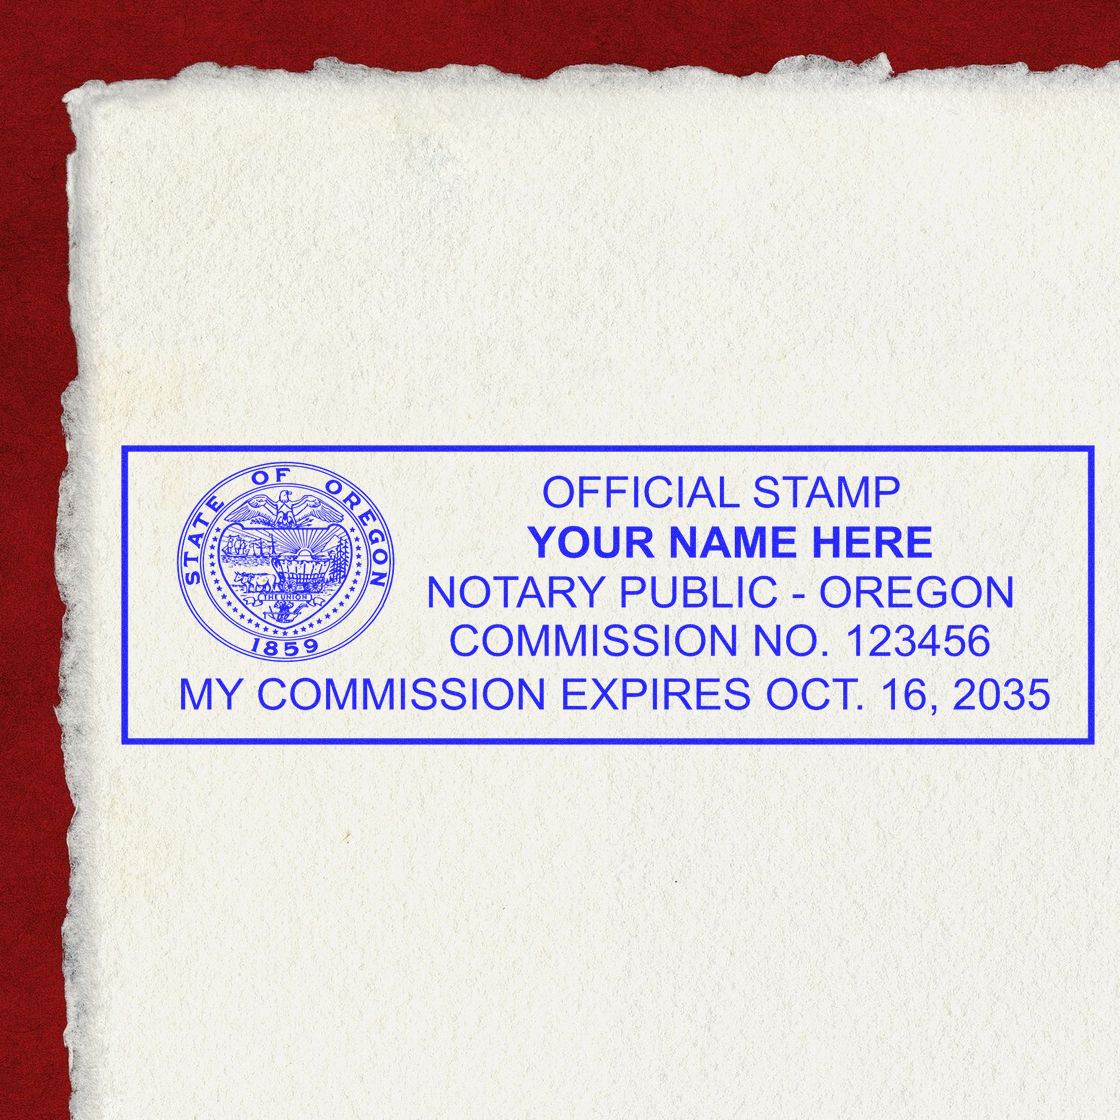 An alternative view of the Heavy-Duty Oregon Rectangular Notary Stamp stamped on a sheet of paper showing the image in use